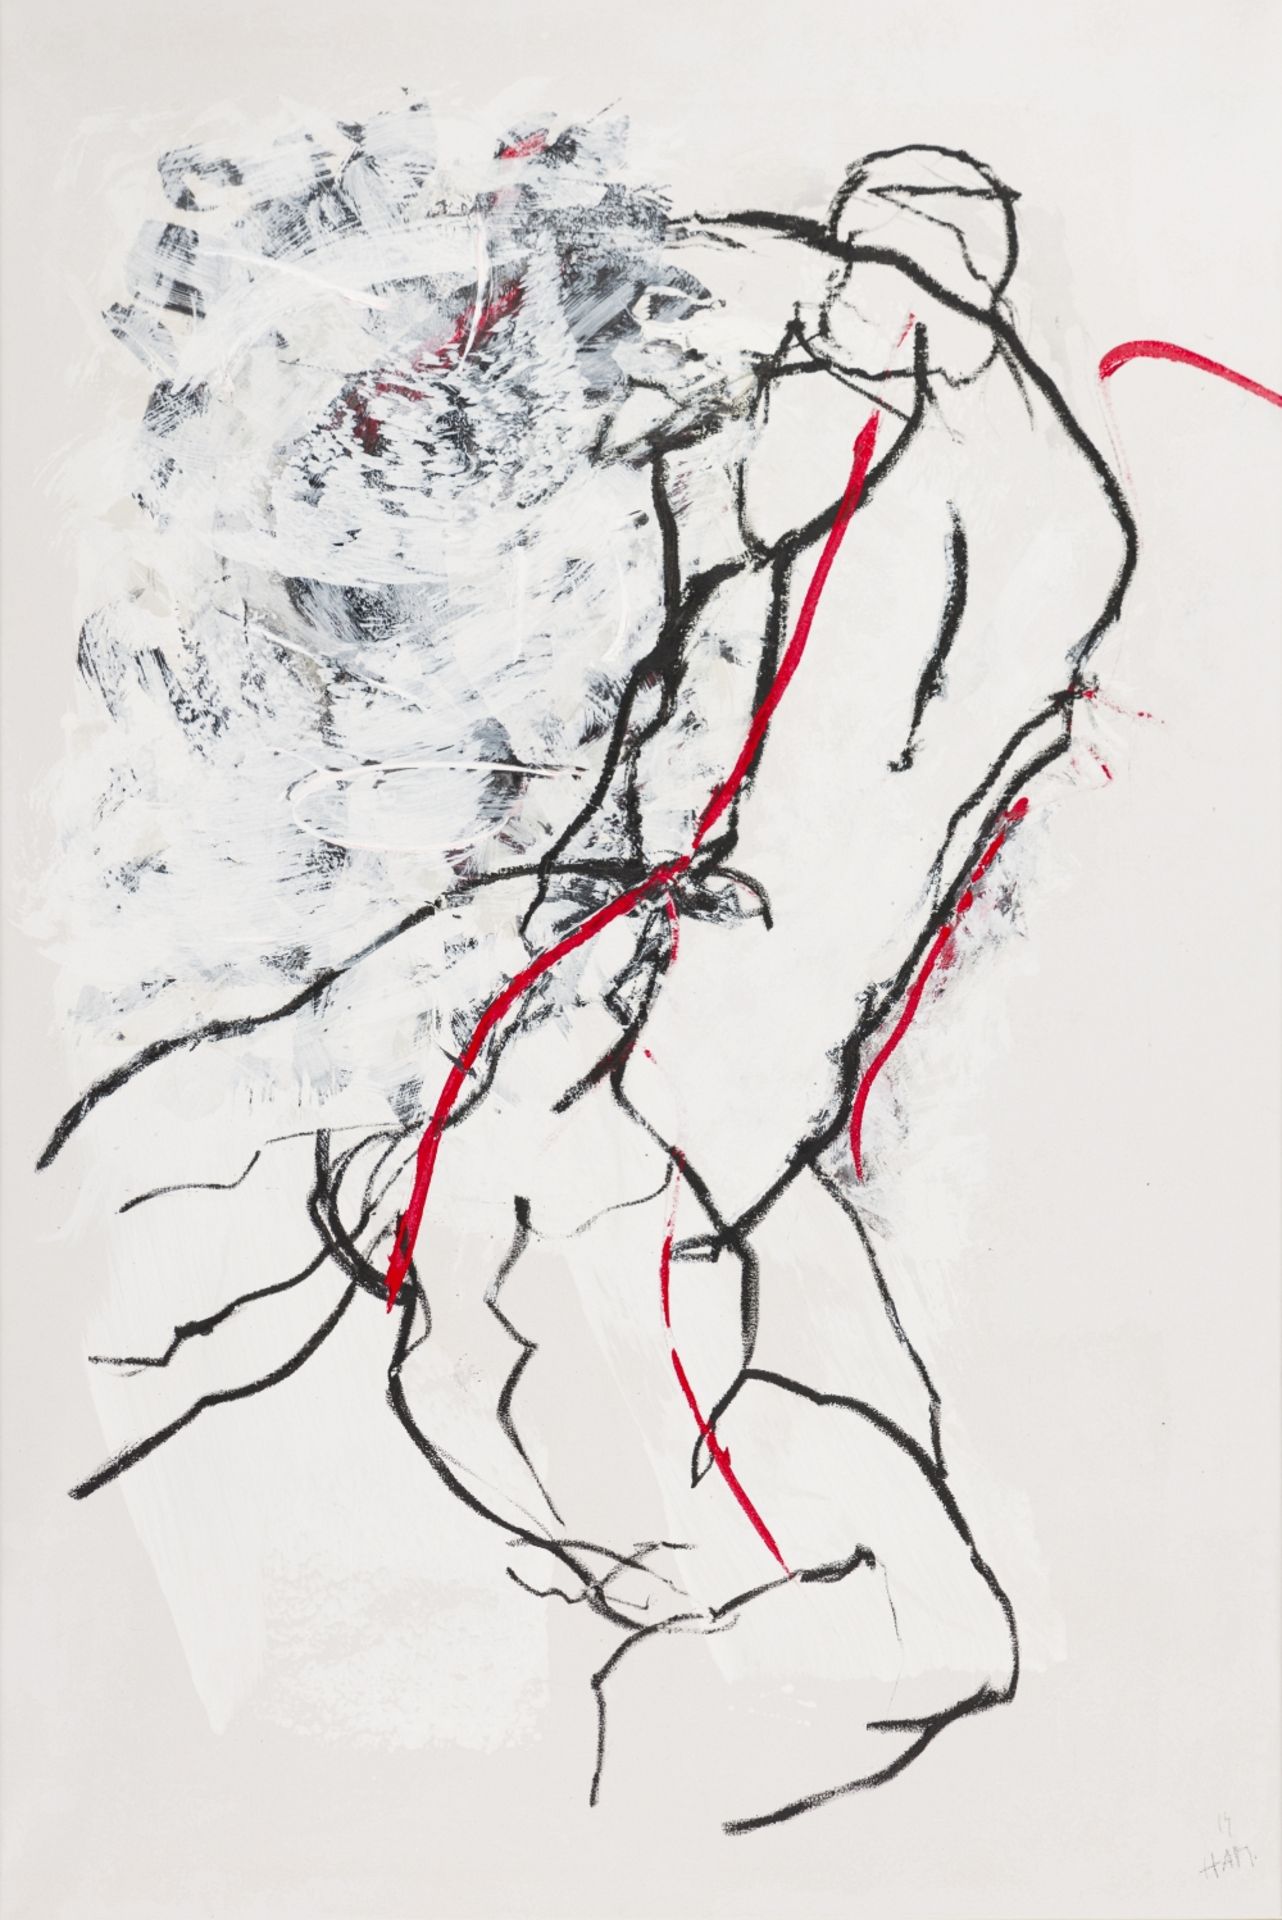 Mlenek, Hannes(*1949)Baal Dances, 2014Acrylic and oil on canvasSigned and dated lower right and